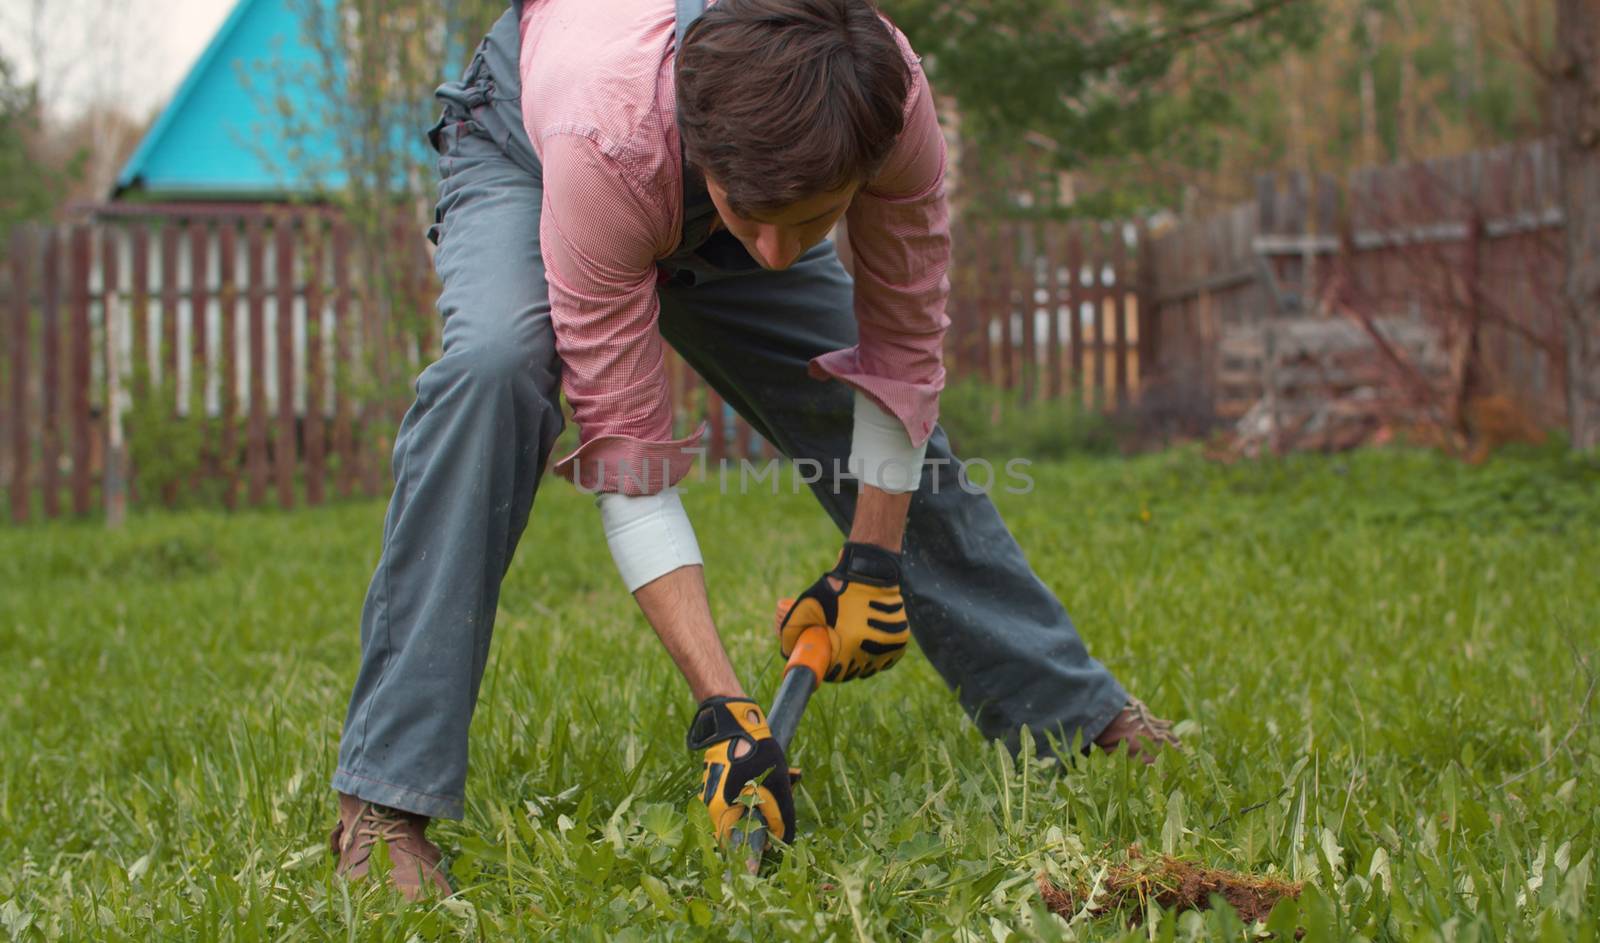 Gardener digging soil on a lawn in the yard by Alize